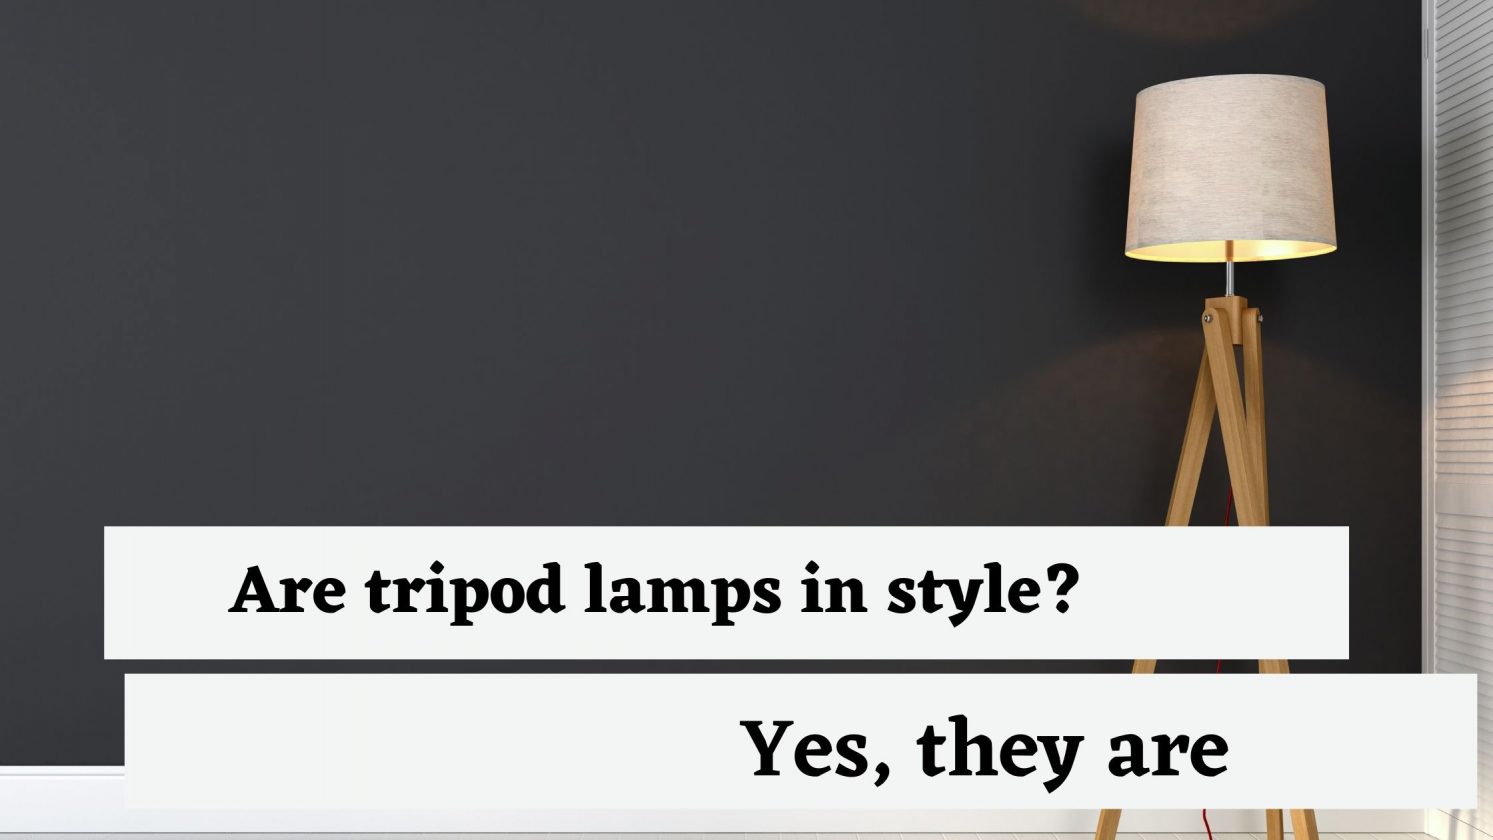 Are tripod lamps in style?